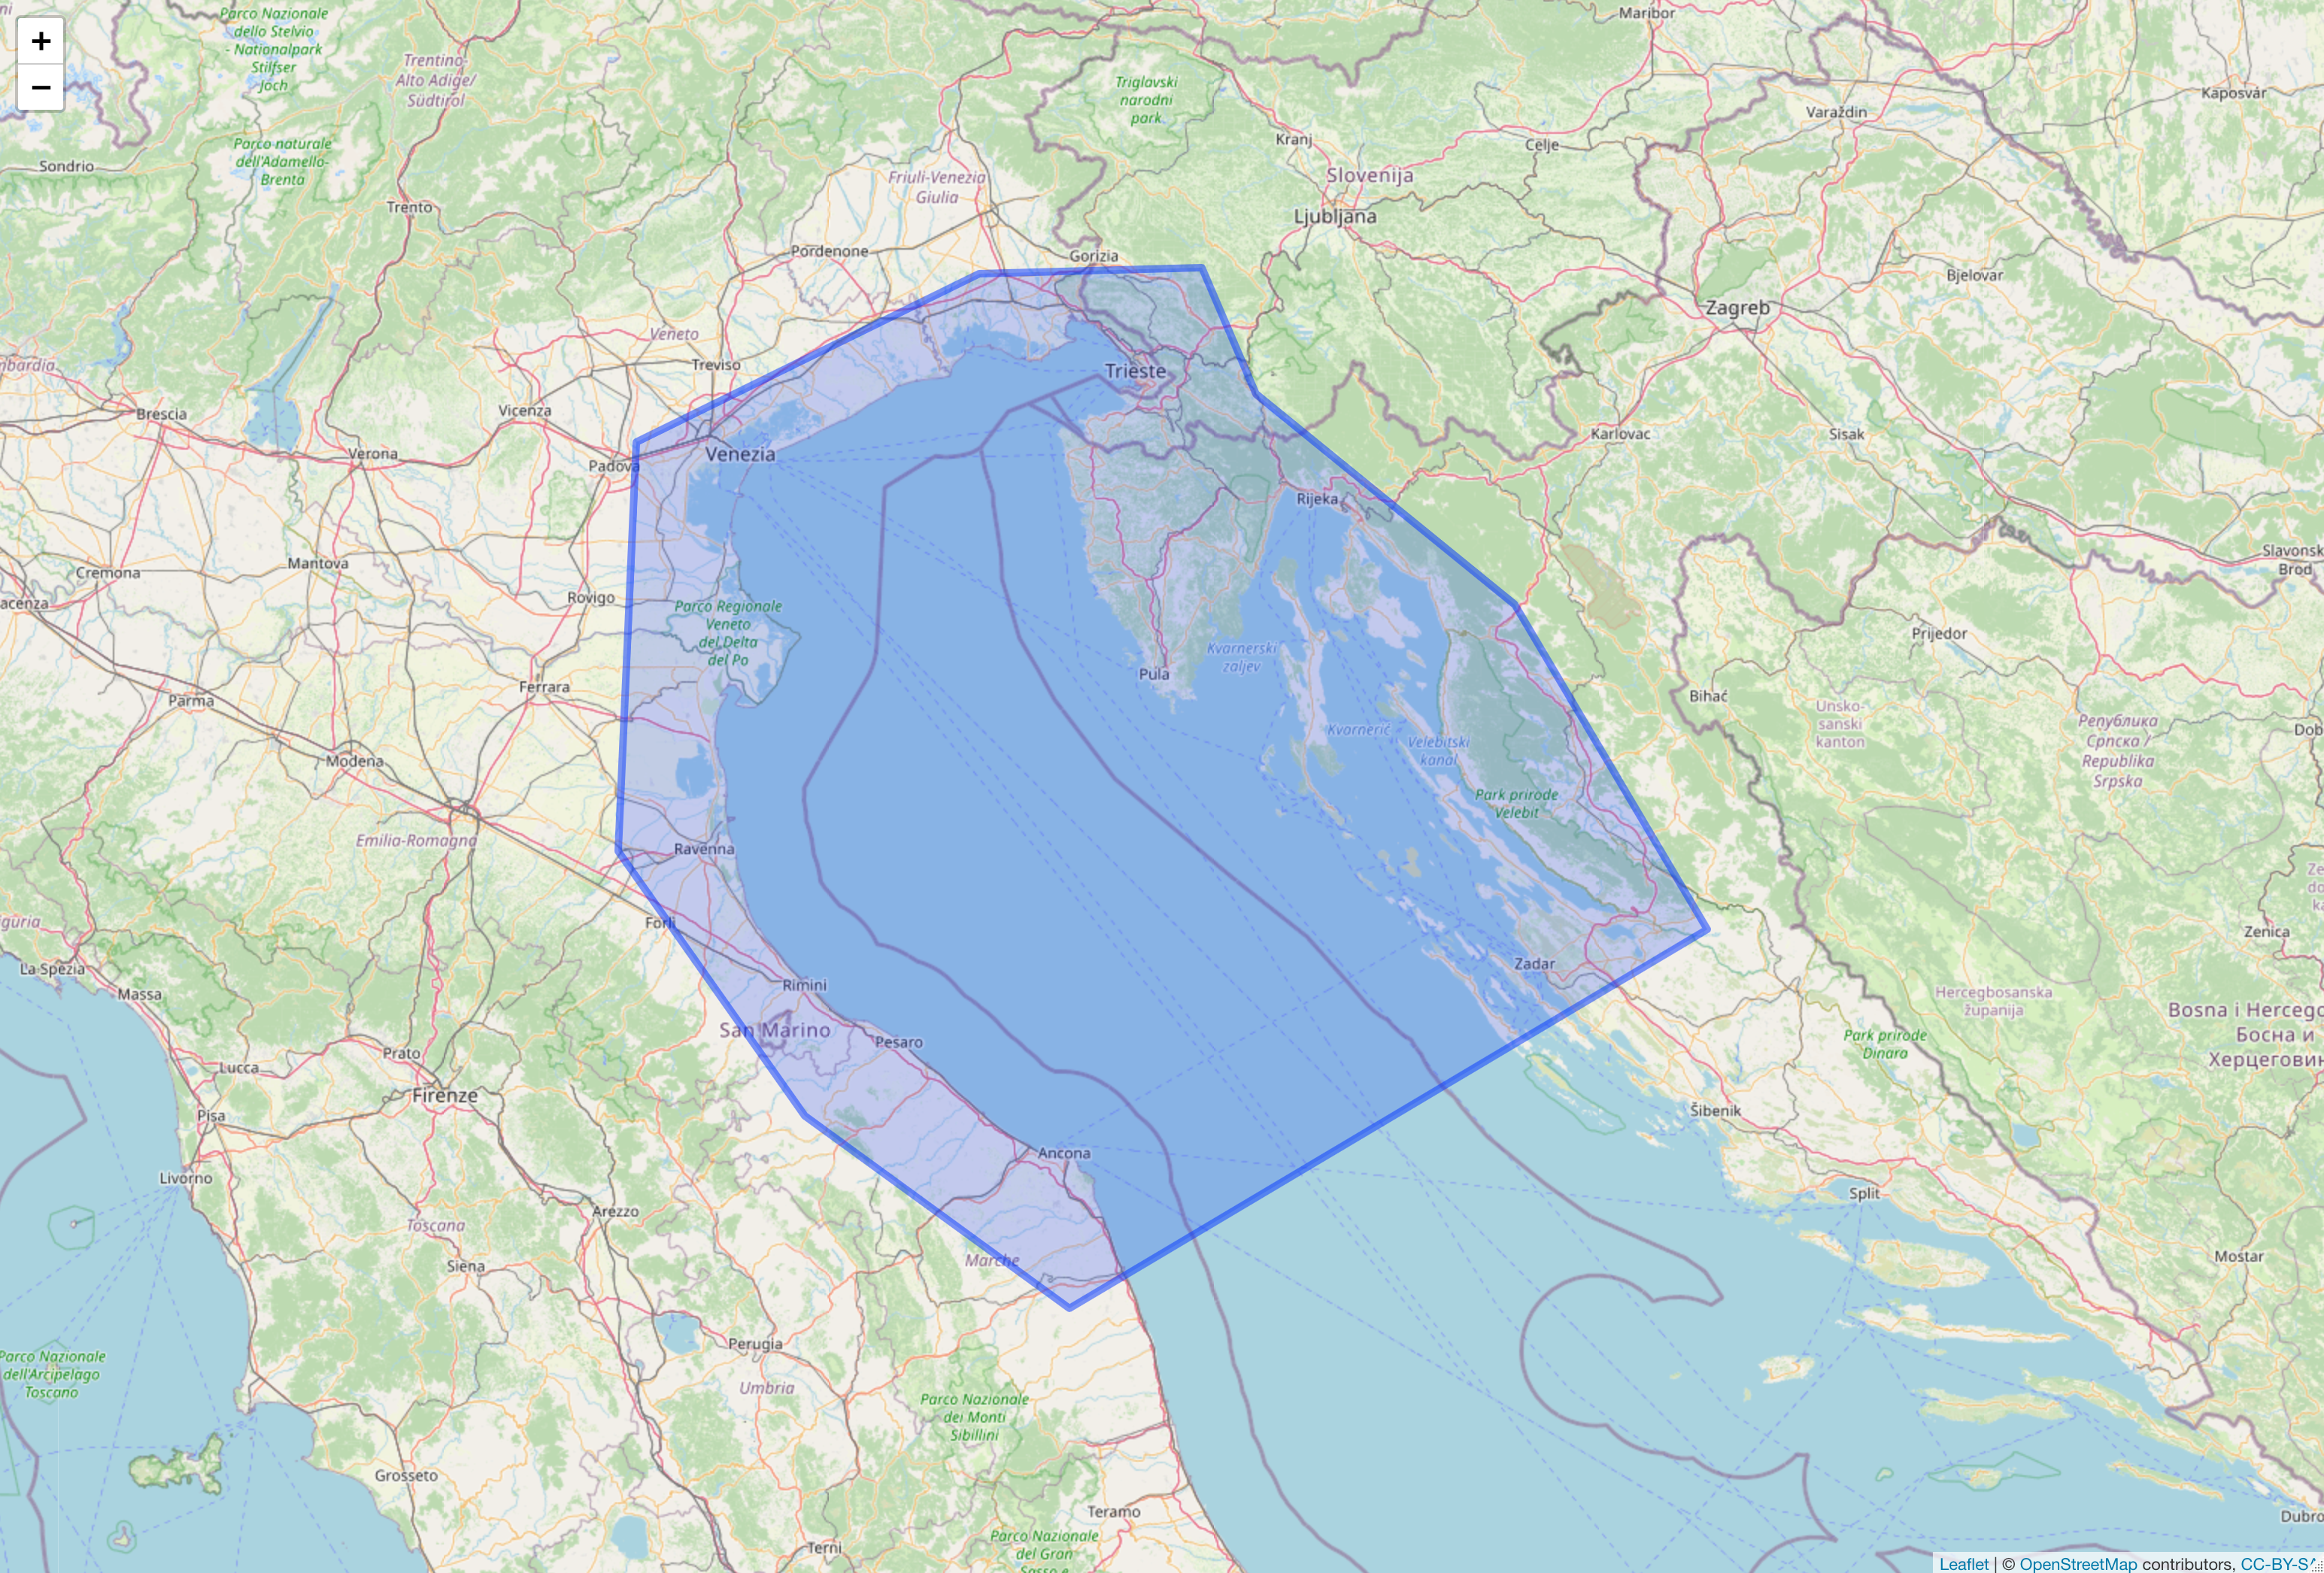 Map of "LTER Northern Adriatic Sea (Italy)
